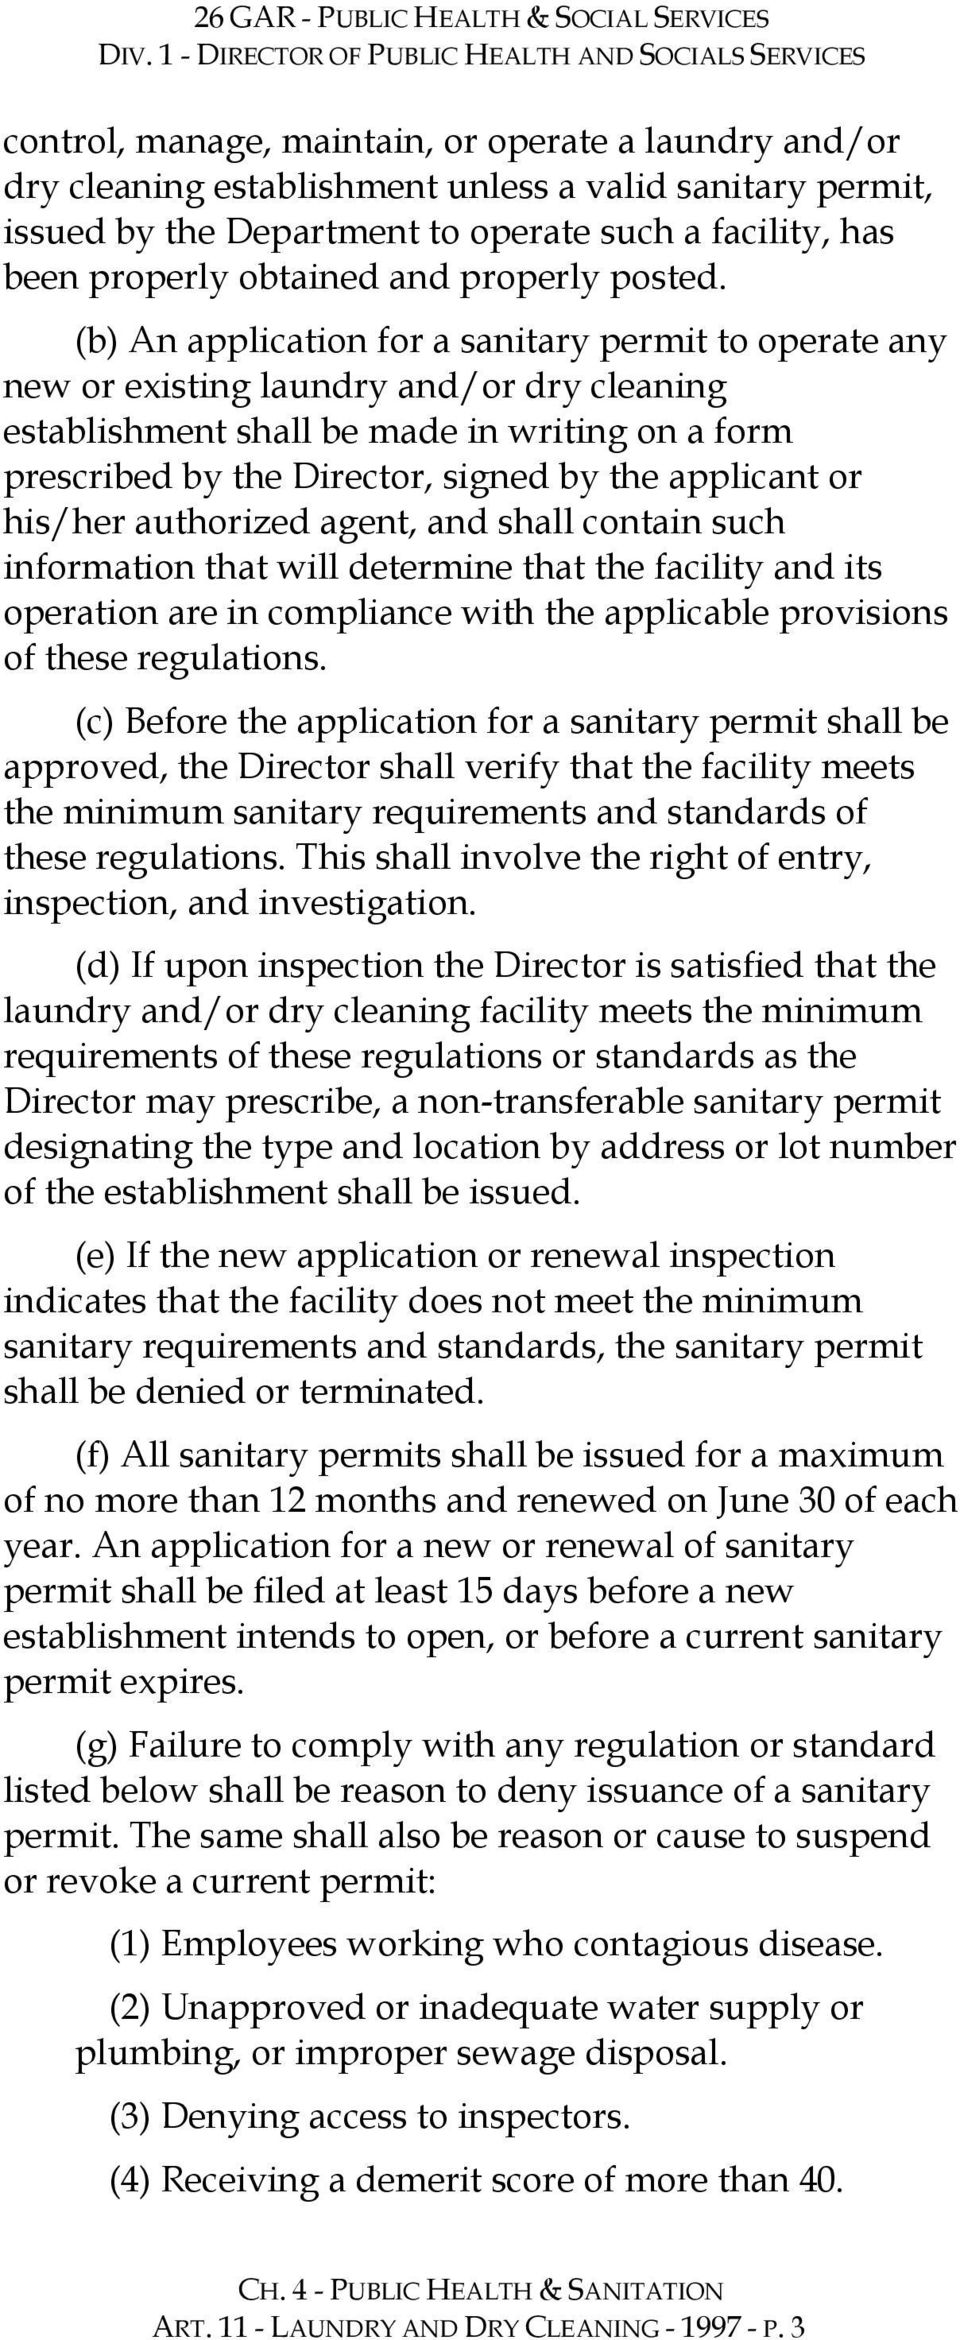 (b) An application for a sanitary permit to operate any new or existing laundry and/or dry cleaning establishment shall be made in writing on a form prescribed by the Director, signed by the